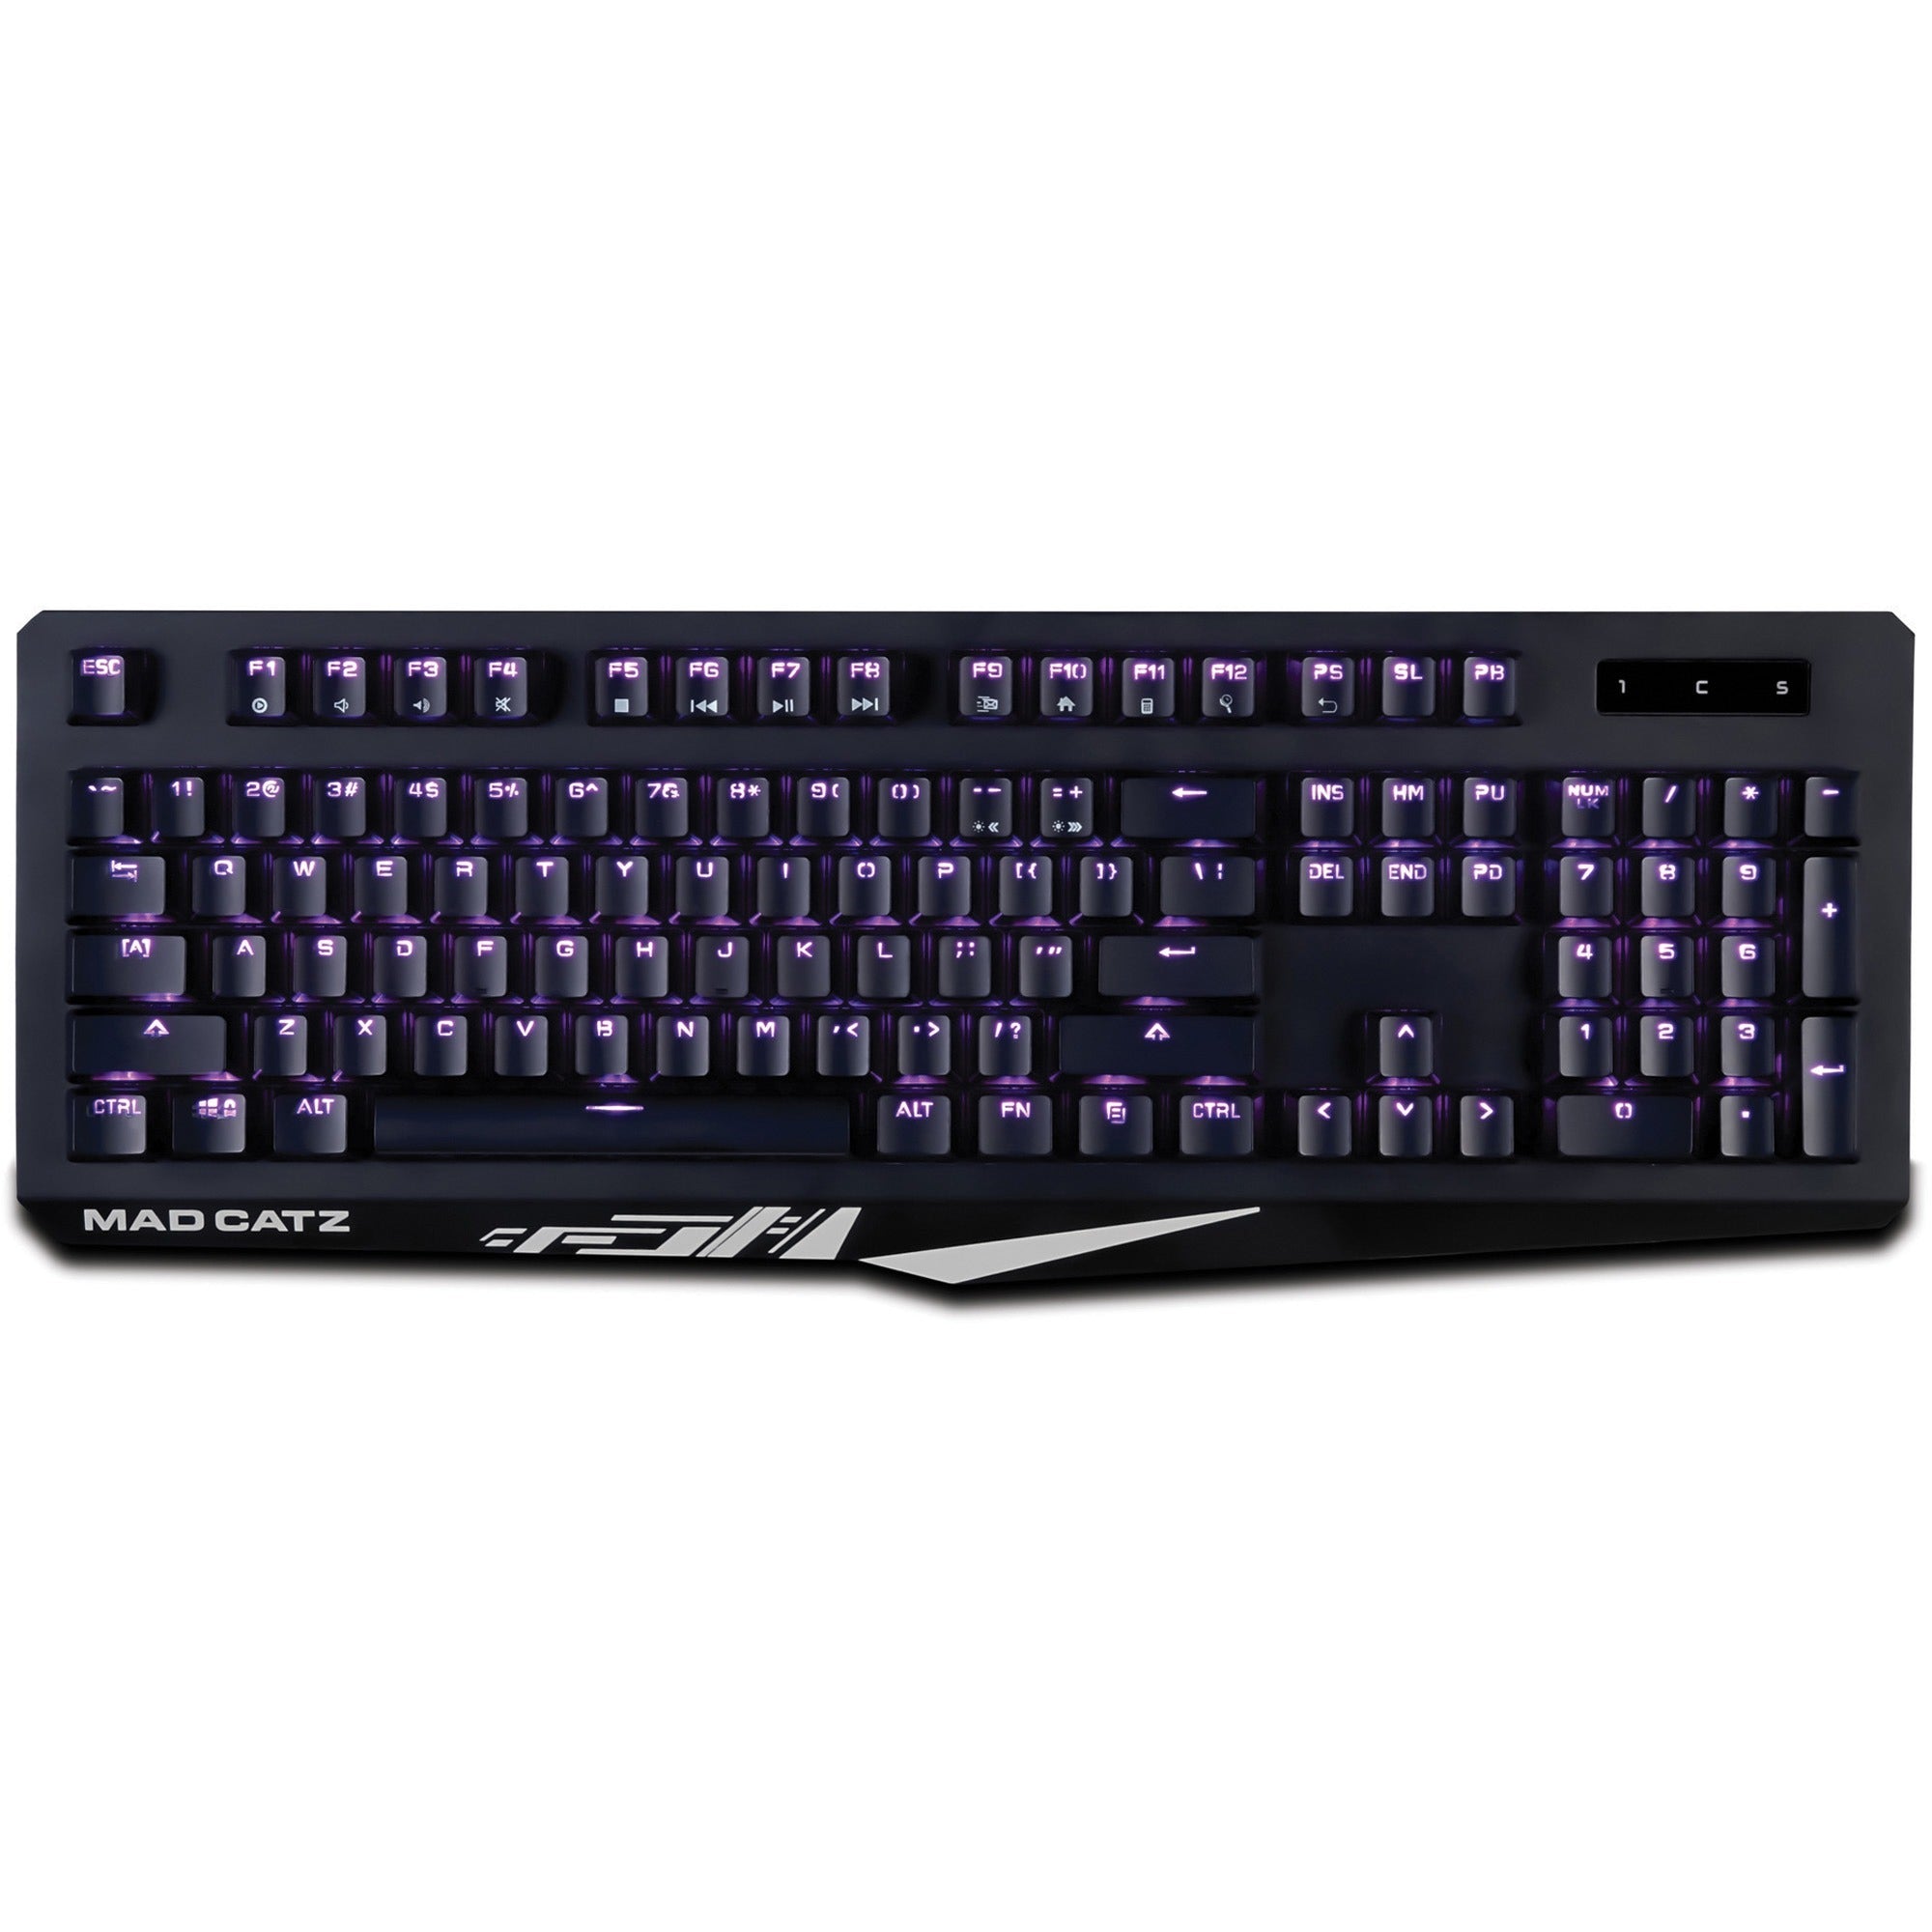 mad-catz-the-authentic-strike-4-mechanical-gaming-keyboard-black-cable-connectivity-multimedia-hot-keys-windows-mechanical-keyswitch_mdcks13mmusbl00 - 1